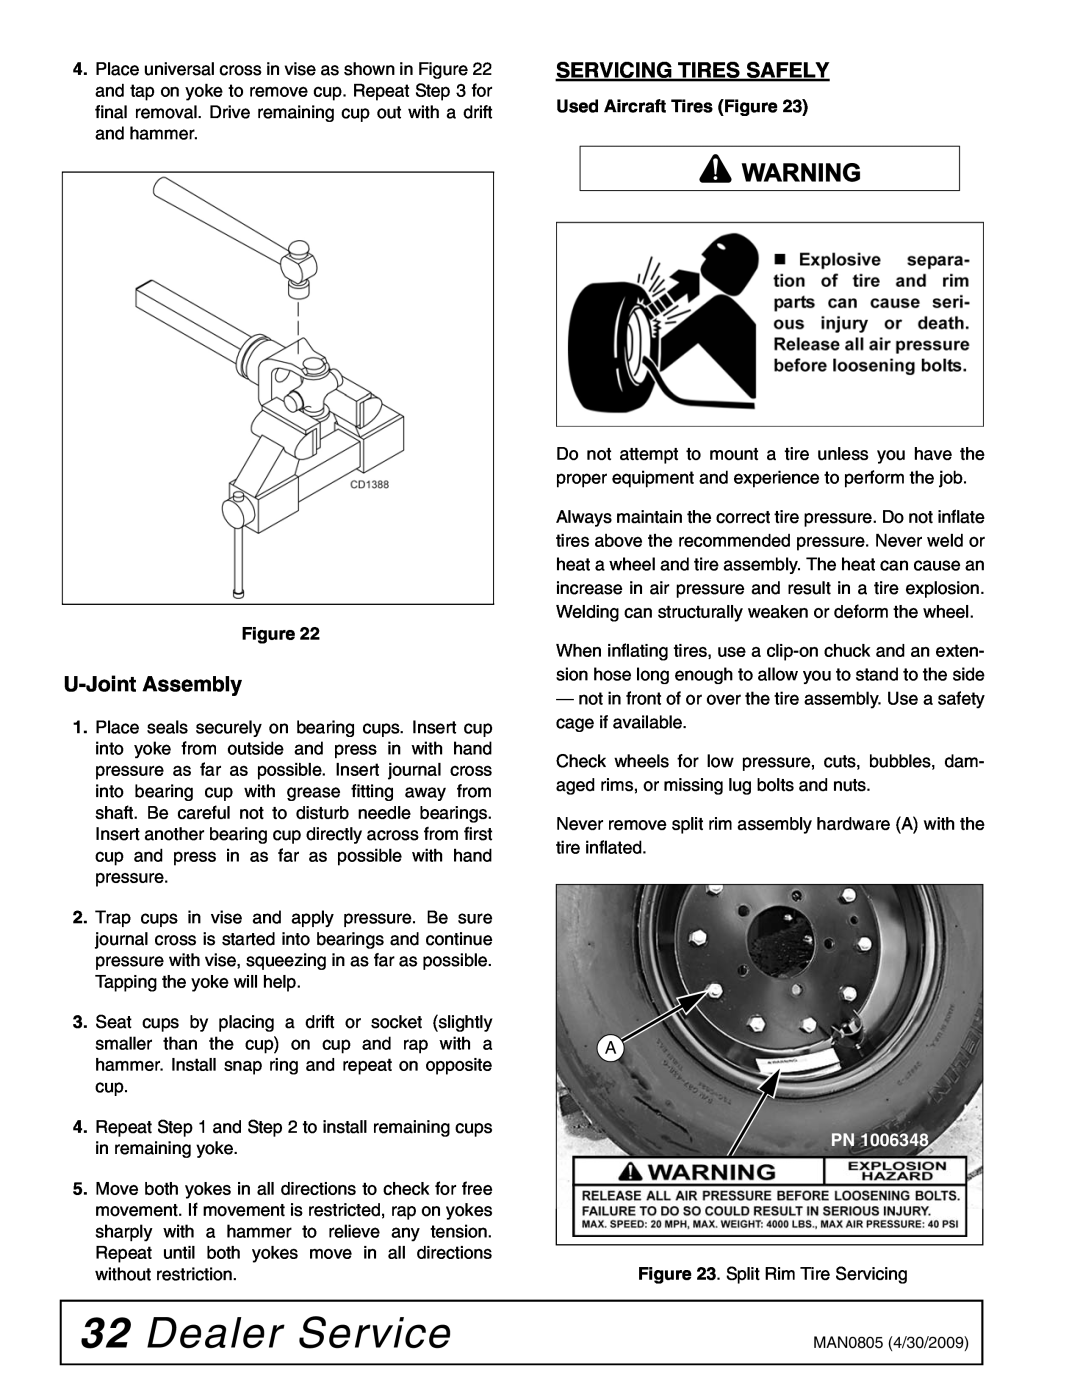 Woods Equipment BW126HBQ, BW180HBQ manual Dealer Service, U-Joint Assembly, Servicing Tires Safely 